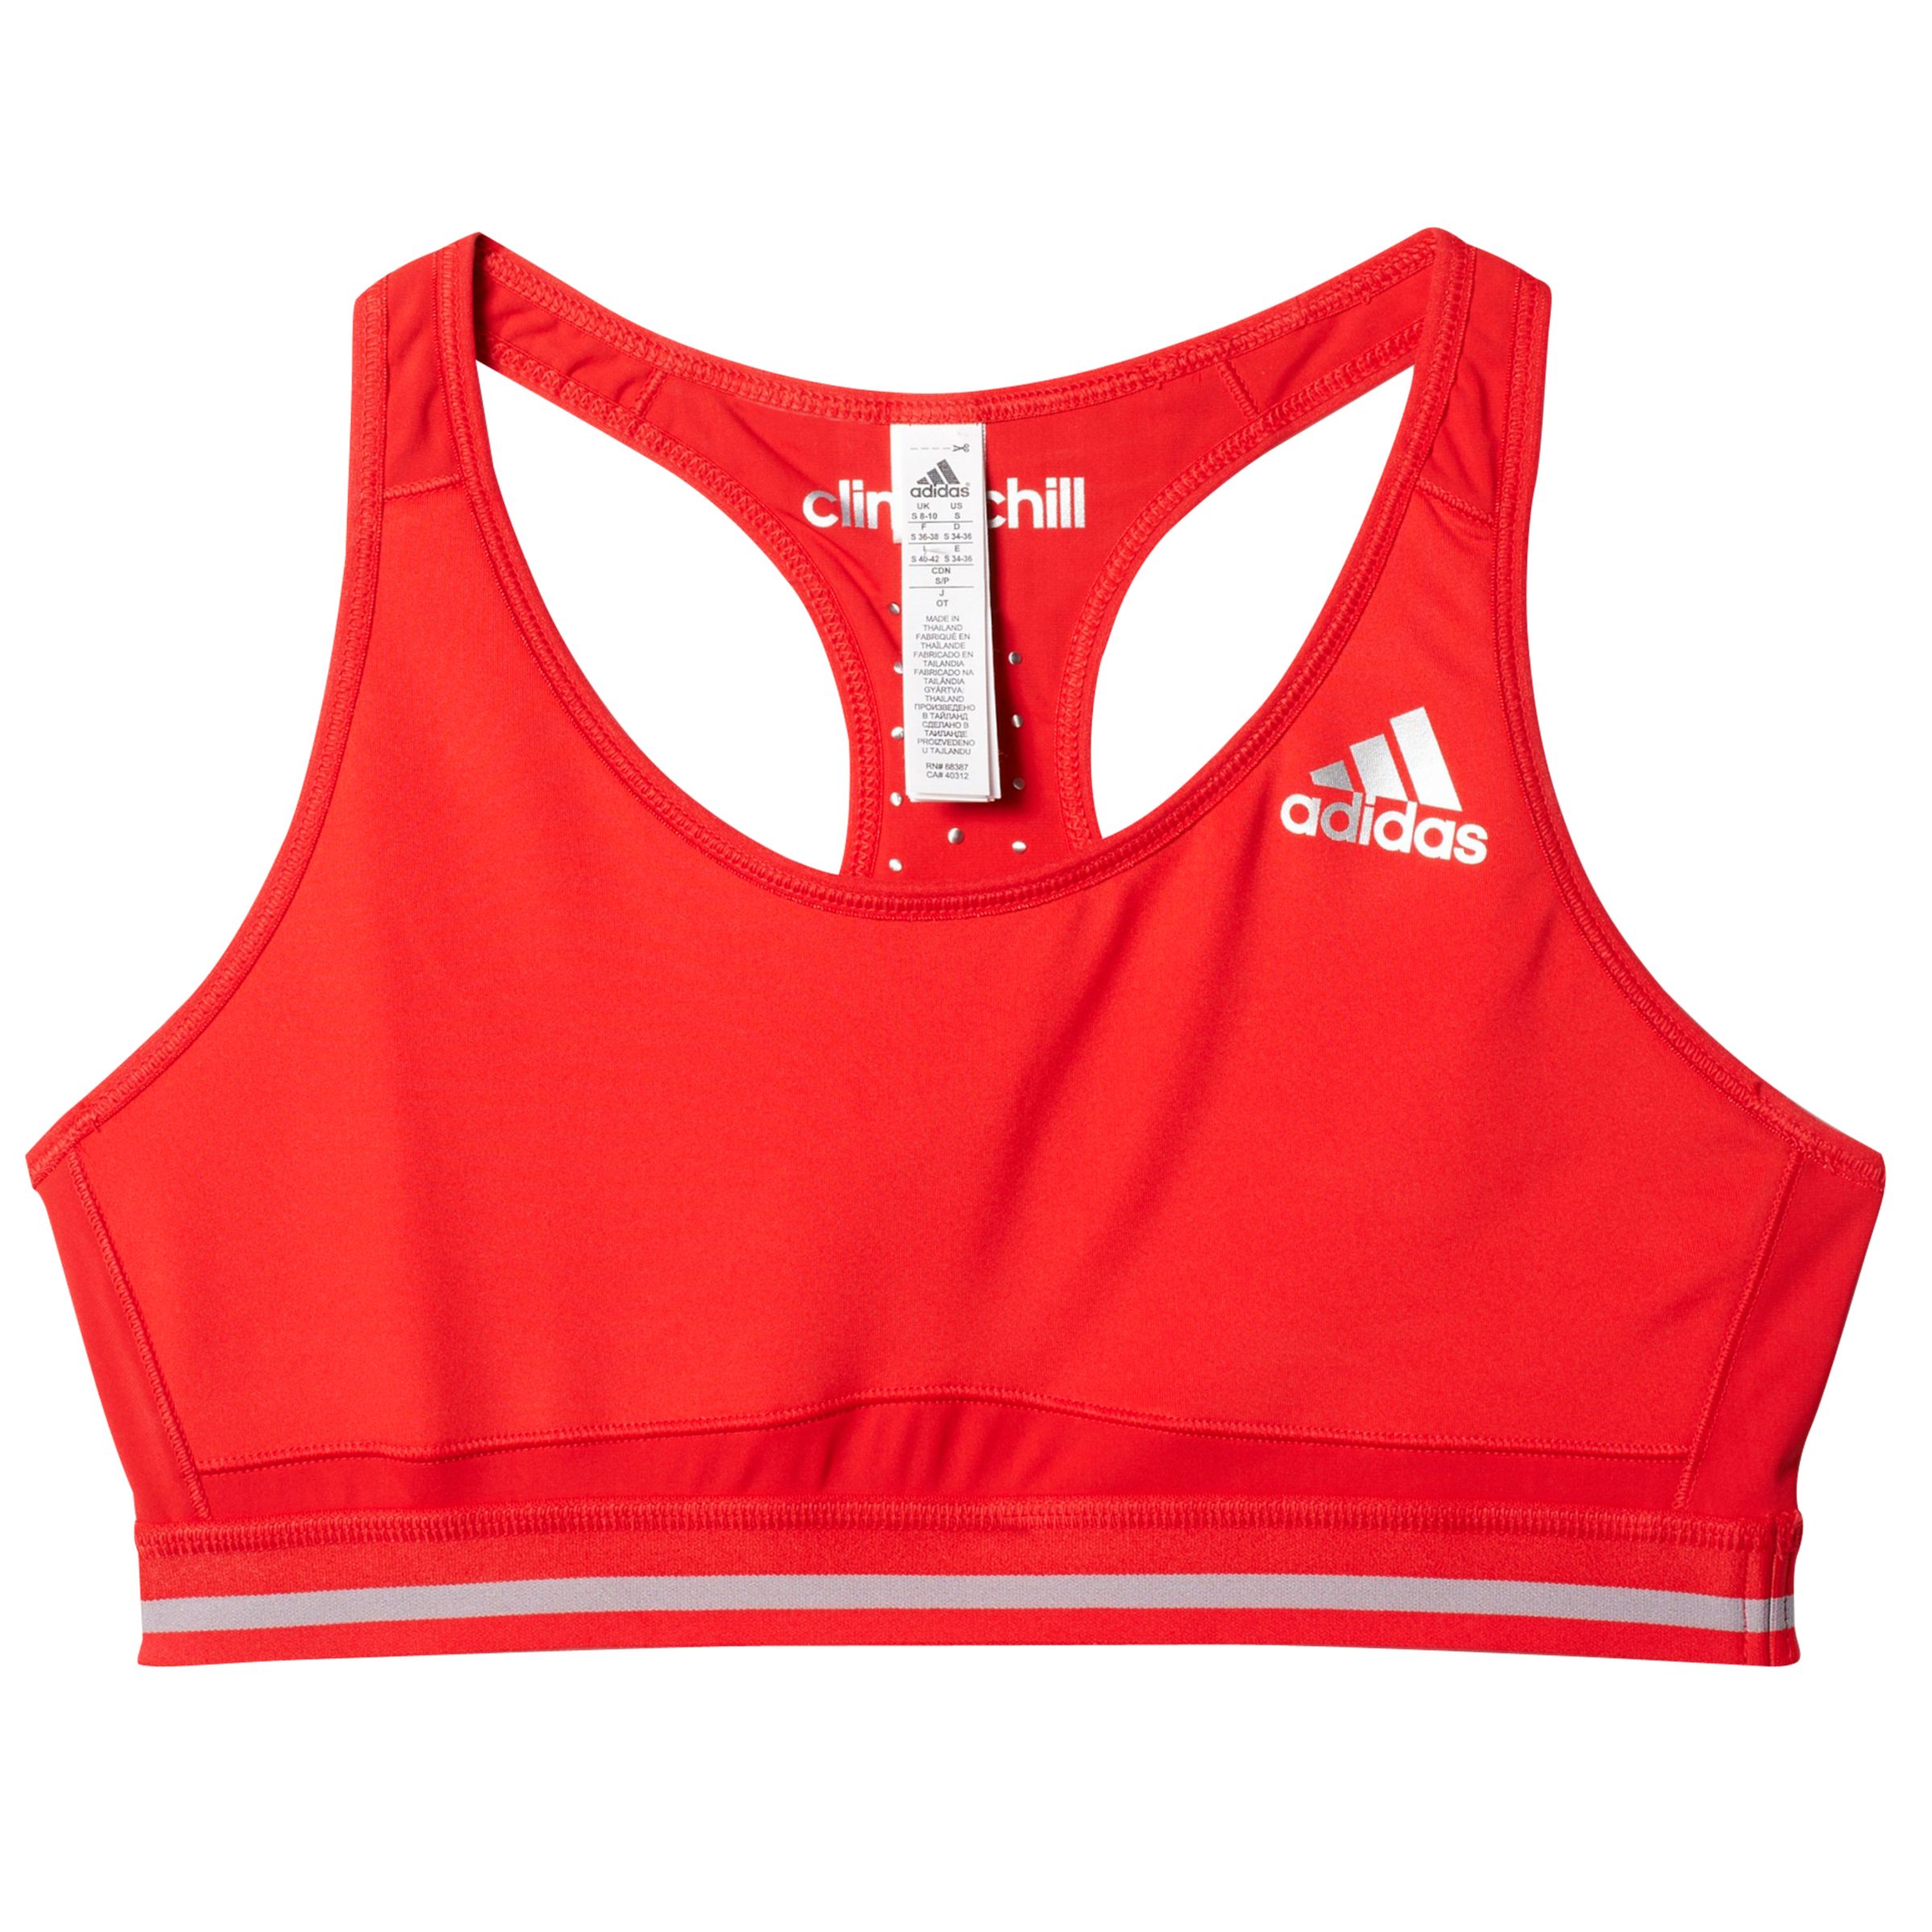 Adidas Techfit Climachill Weightlifting Sports Bra, Red